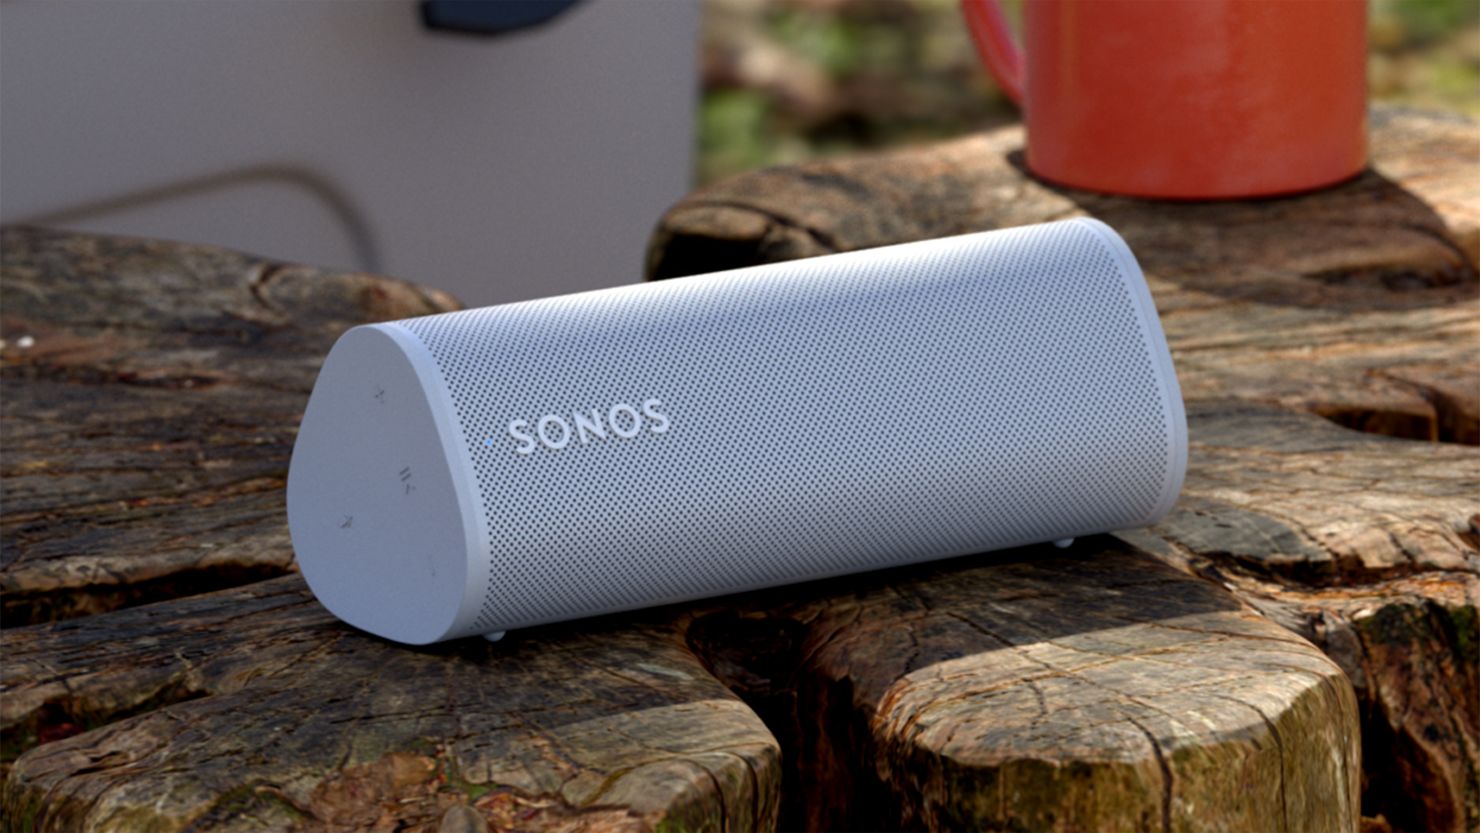 This Sonos System Is the Easiest, Best-Sounding Way to Enjoy Music